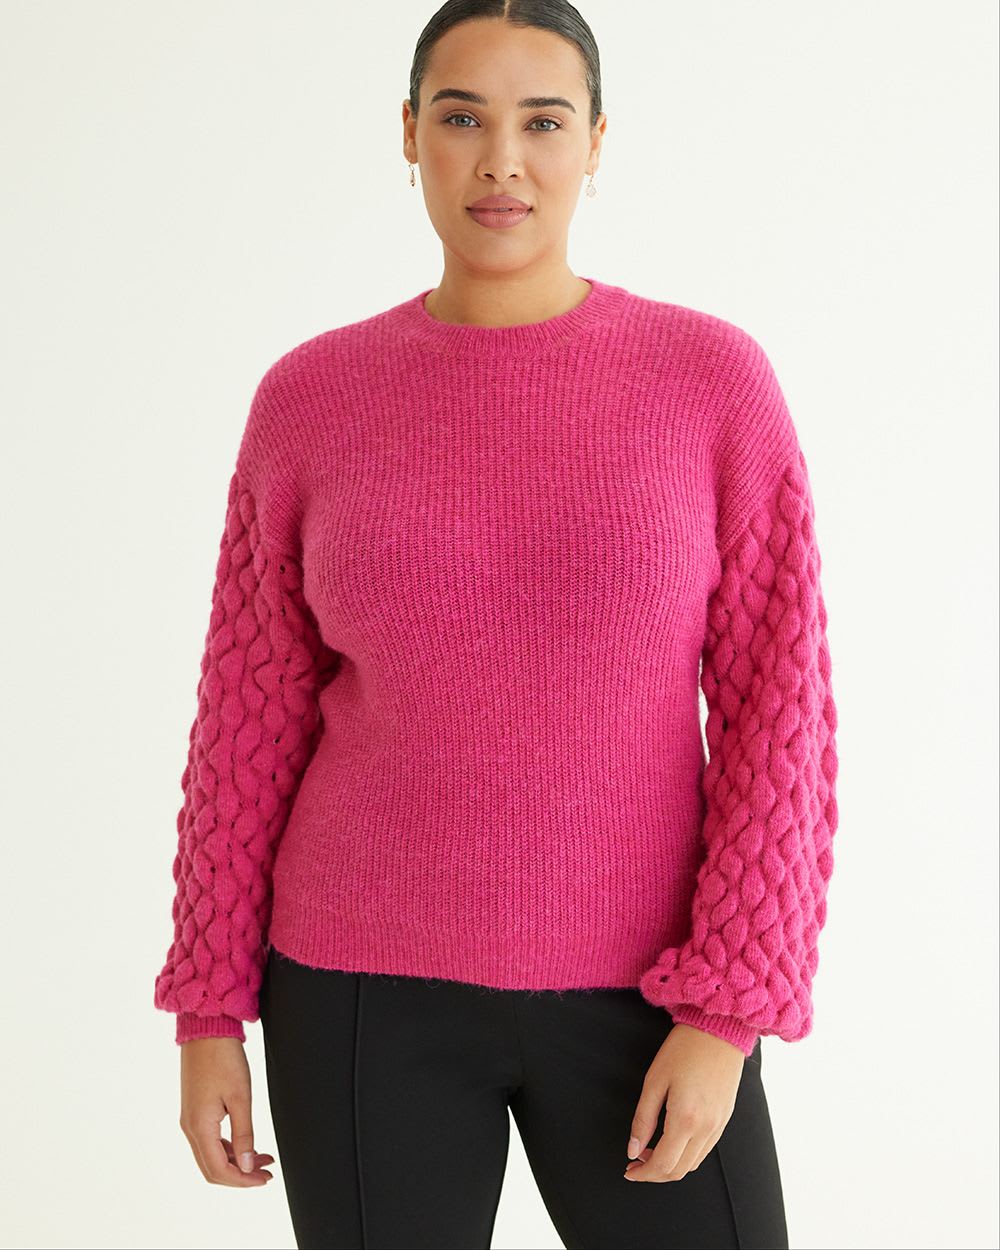 Long-Ballon-Sleeve Crew-Neck Sweater with Fancy Stitches, Regular